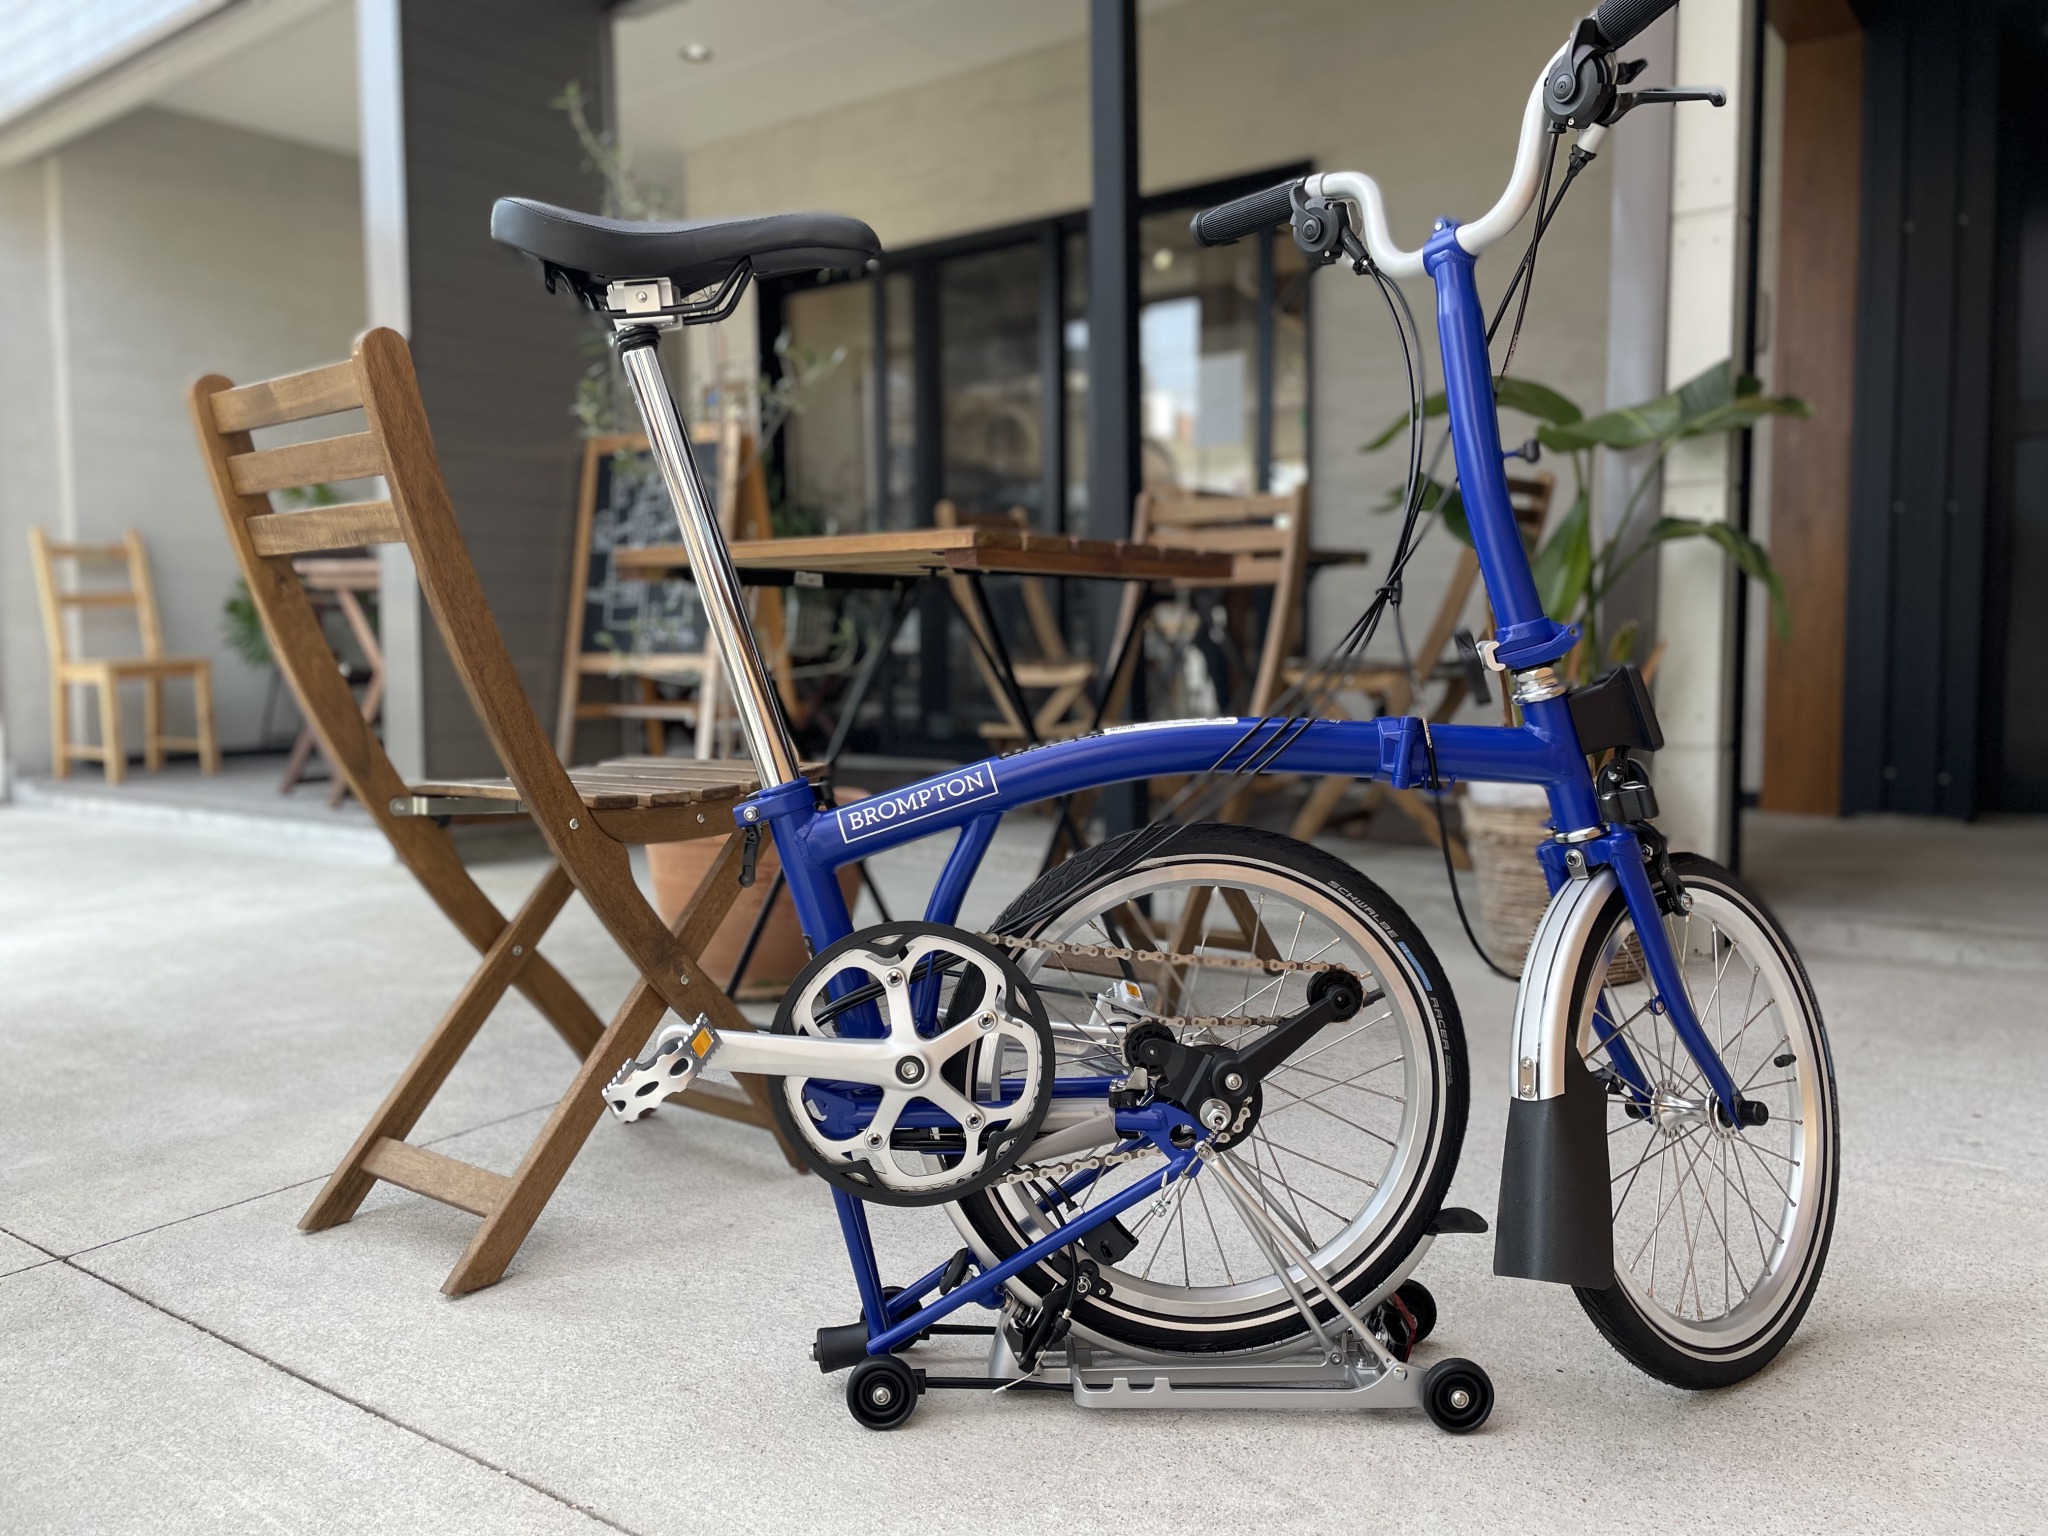 NEW COLOUR ! -BROMPTON ブロンプトン- – cyclemark サイクルマーク